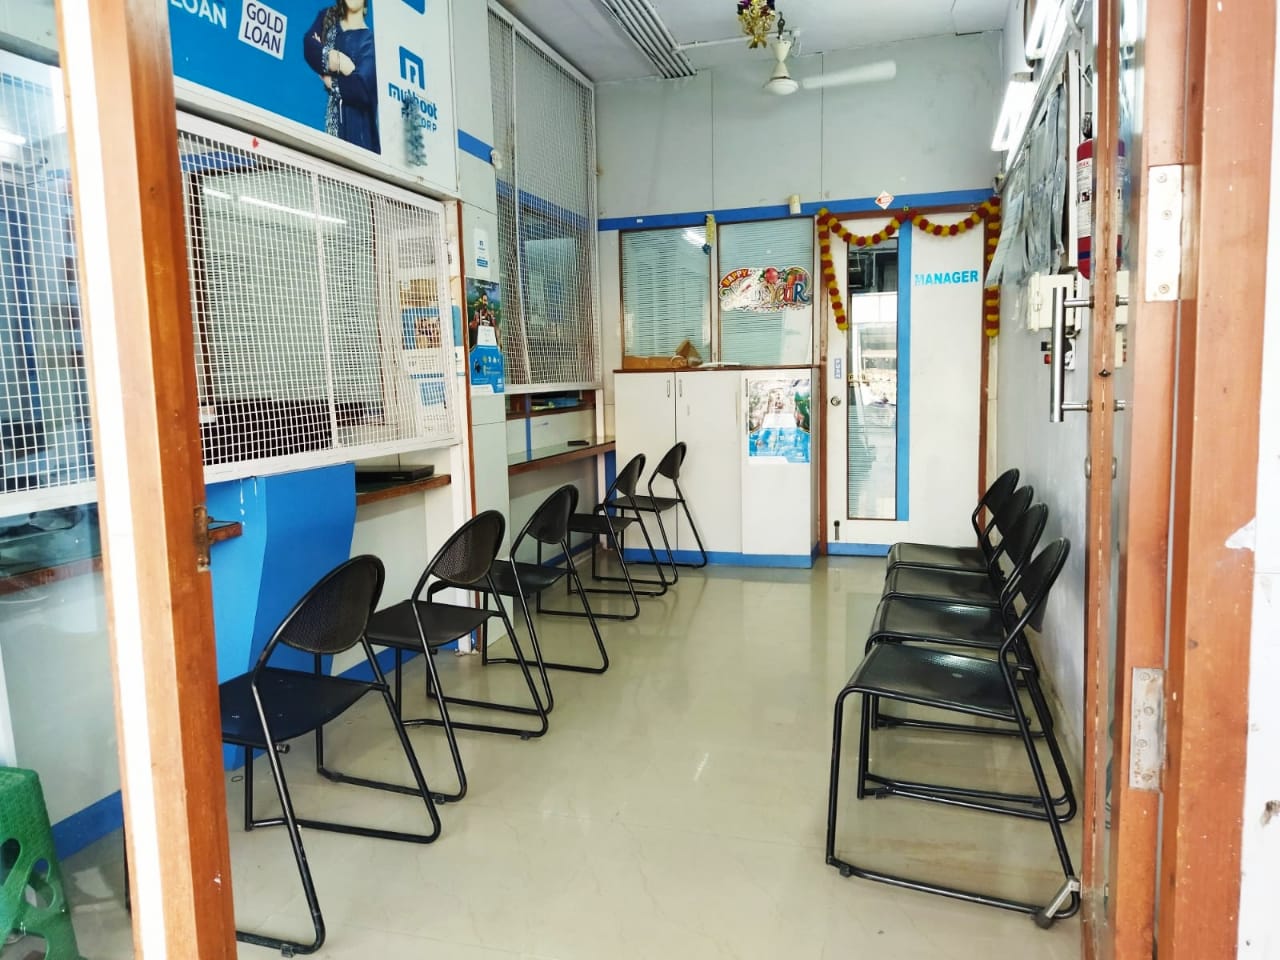 Photos and Videos of Muthoot Fincorp Gold Loan in Parchur, Prakasam